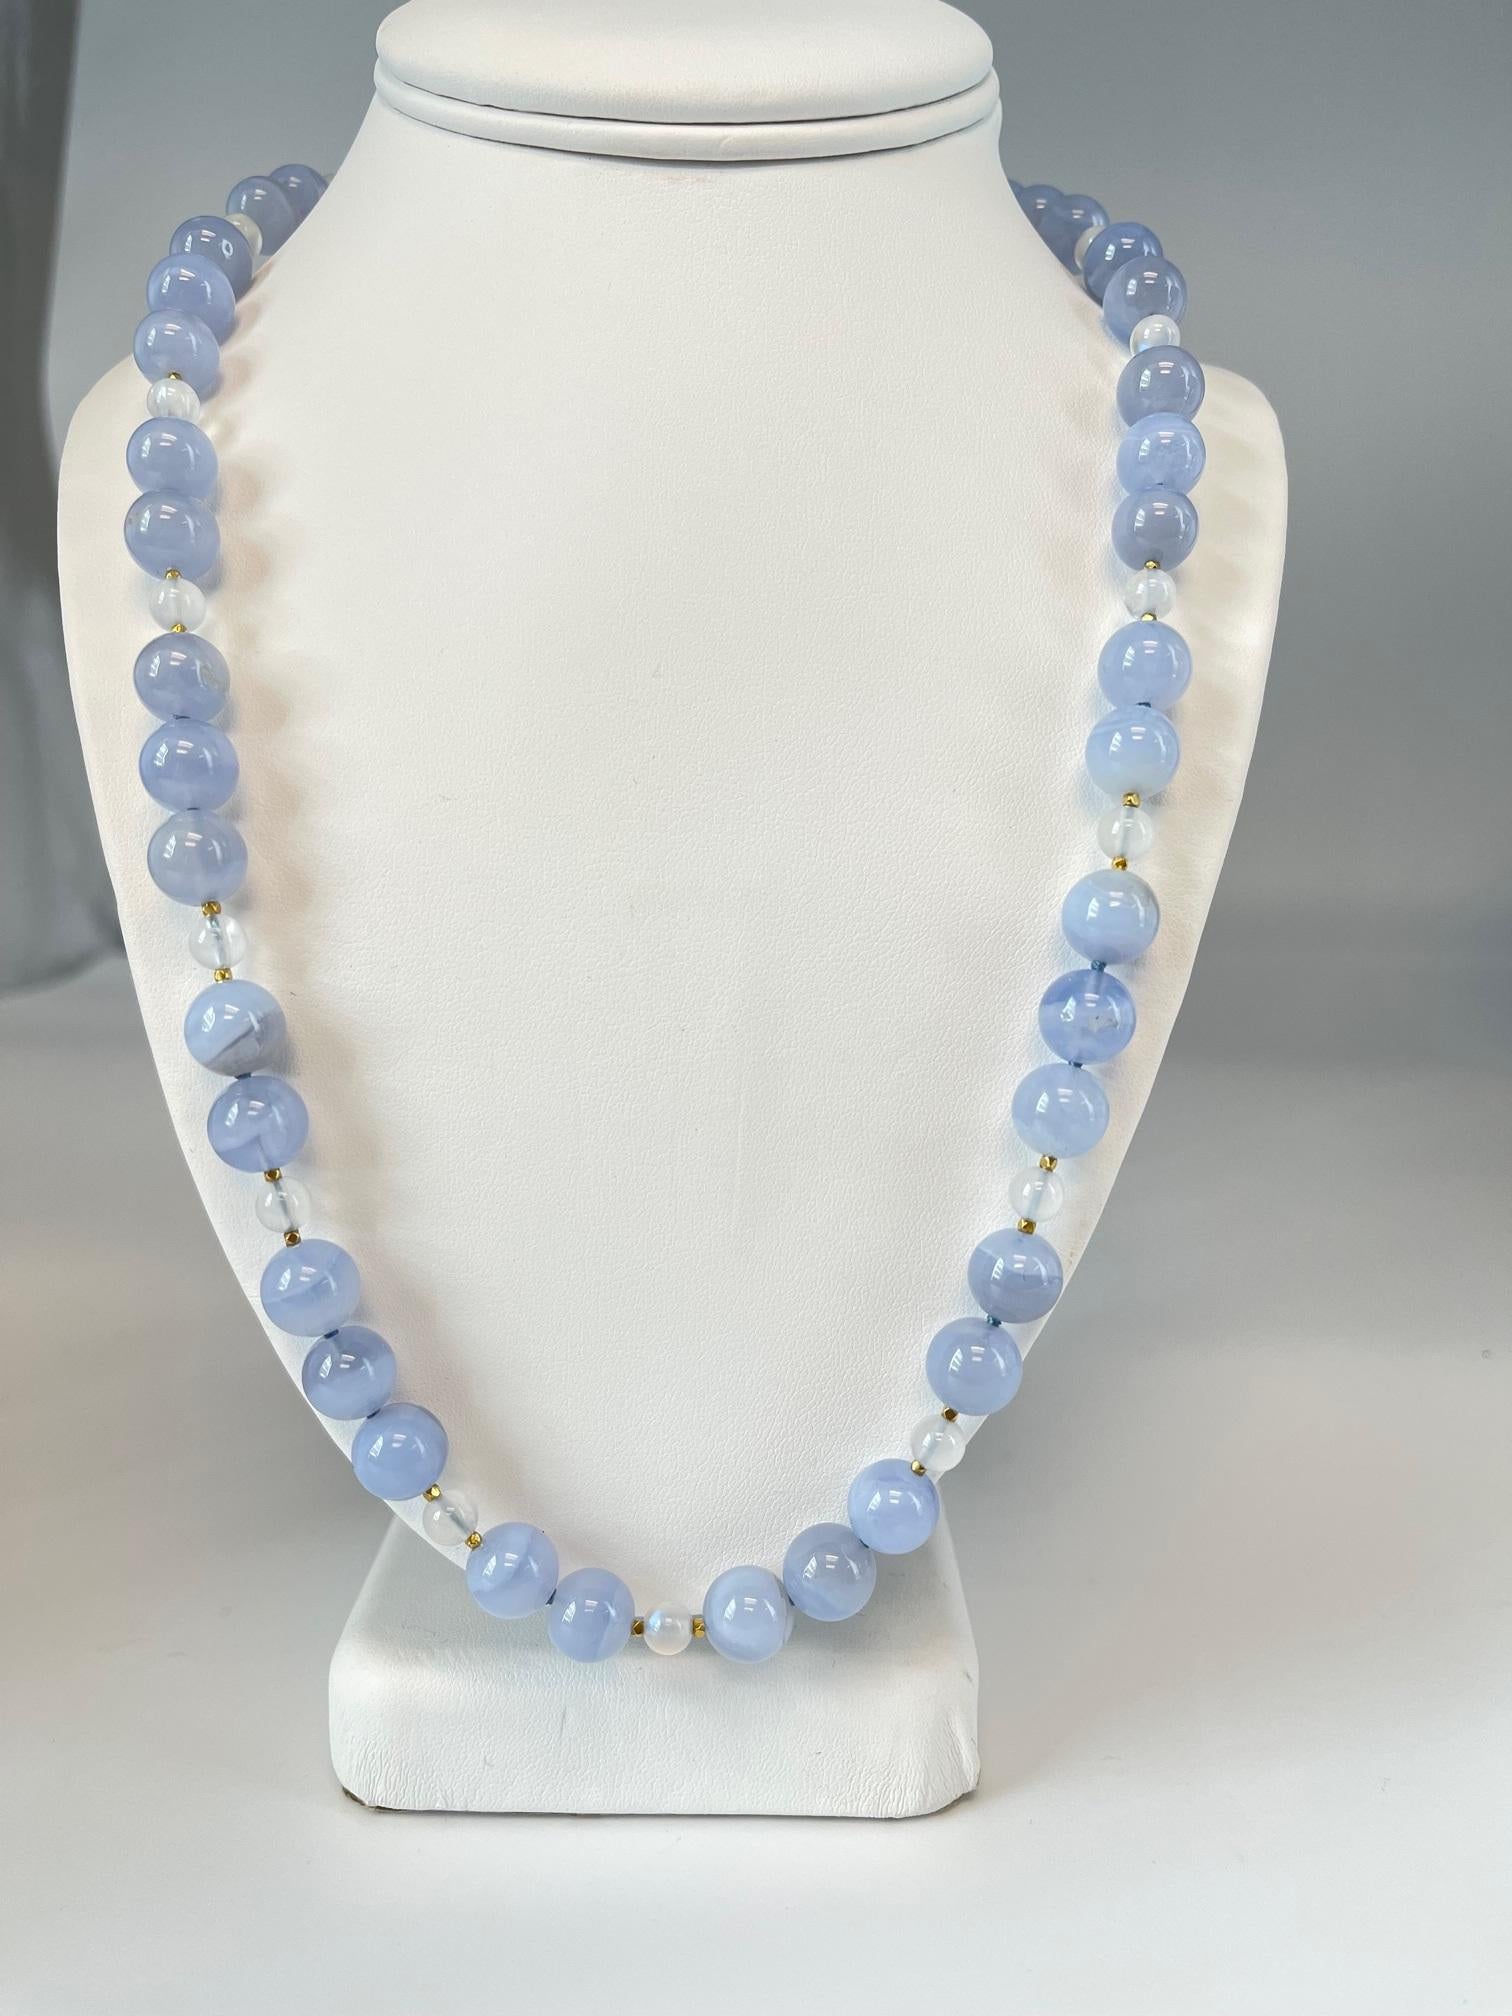 10mm Chalcedony and Moonstone Bead Necklace with Yellow Gold Accents For Sale 2